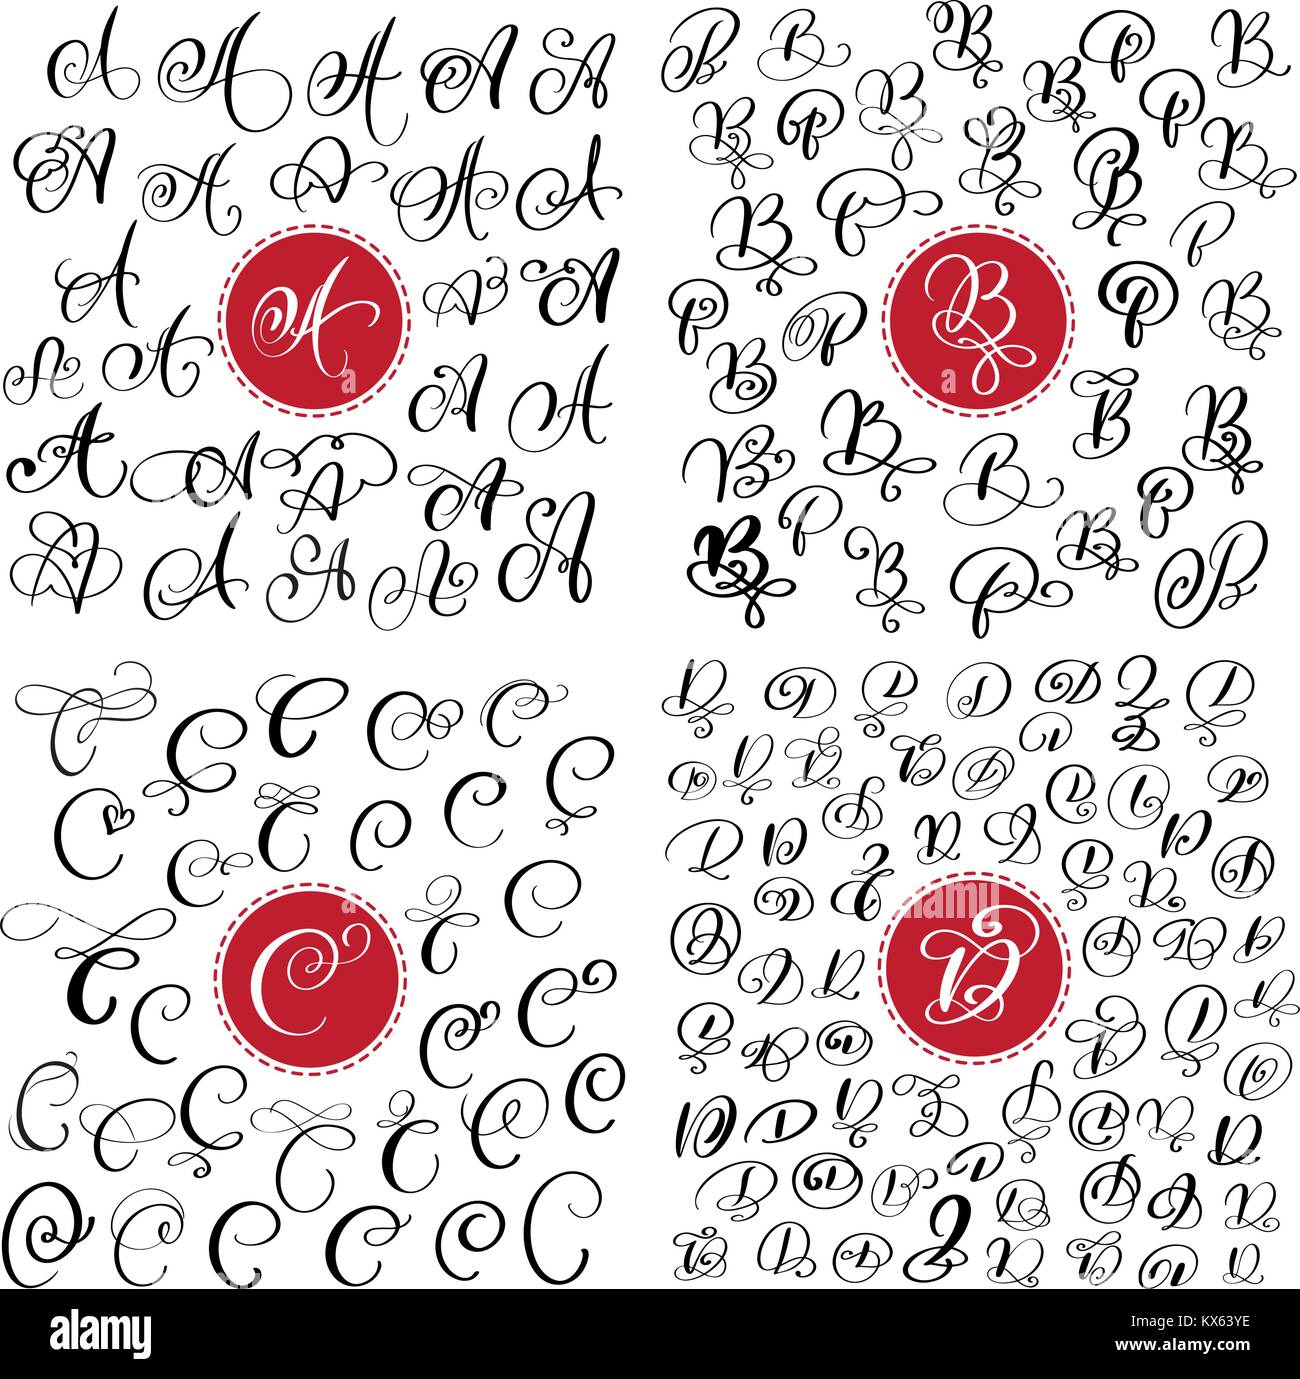 big Set of Hand drawn vector calligraphy letter A, B, C, D. Script font. Isolated letters written with ink. Handwritten brush style. Hand lettering for logos packaging design poster Stock Vector